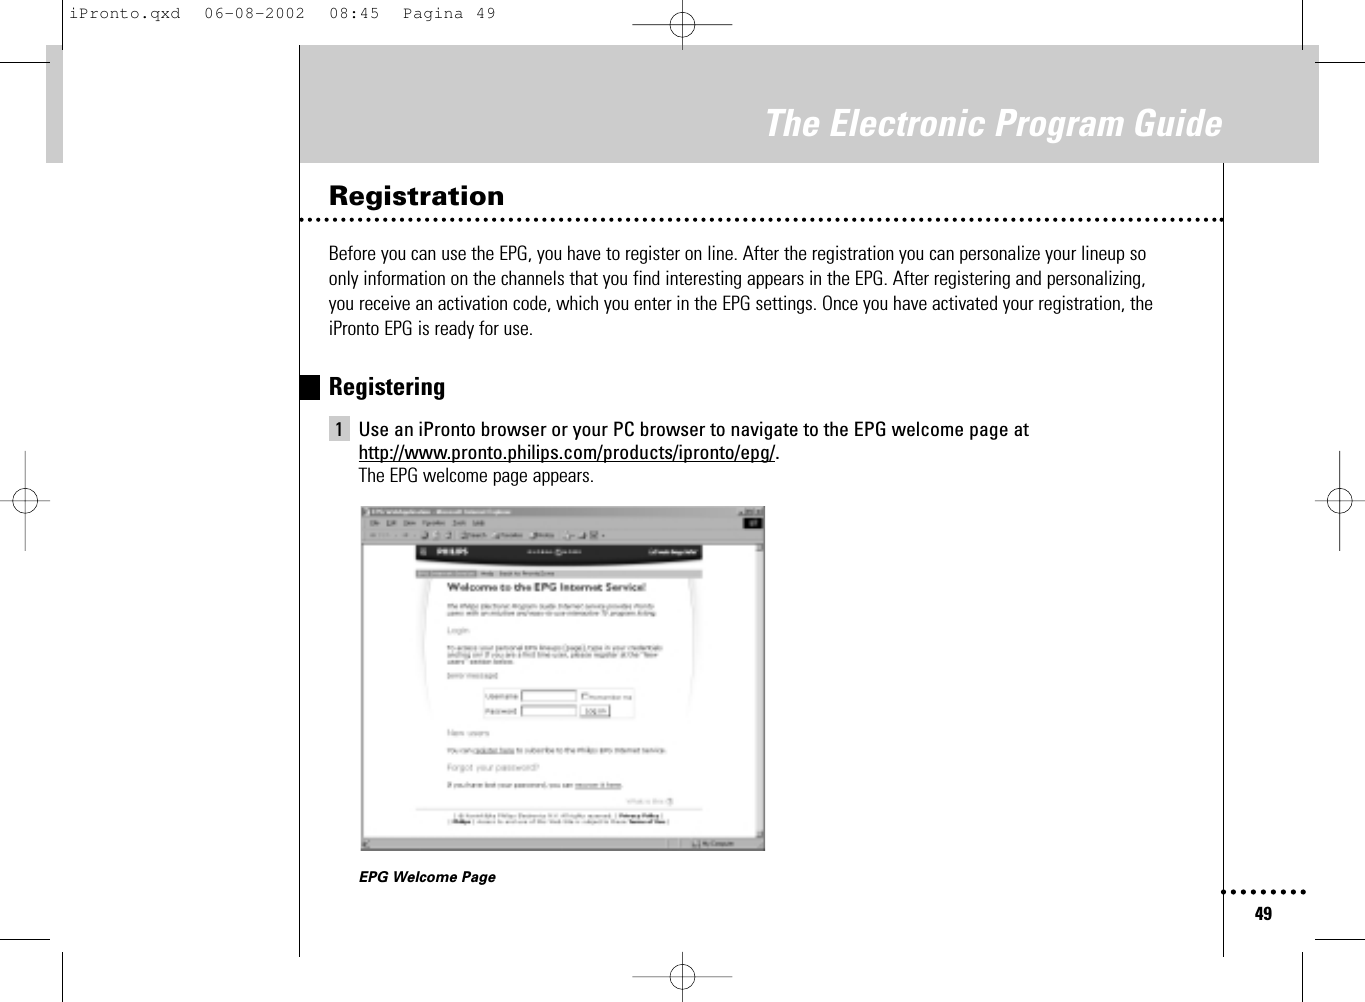 49The Electronic Program GuideRegistrationBefore you can use the EPG, you have to register on line. After the registration you can personalize your lineup so only information on the channels that you find interesting appears in the EPG. After registering and personalizing, you receive an activation code, which you enter in the EPG settings. Once you have activated your registration, theiPronto EPG is ready for use.Registering1 Use an iPronto browser or your PC browser to navigate to the EPG welcome page athttp://www.pronto.philips.com/products/ipronto/epg/.The EPG welcome page appears.EPG Welcome PageiPronto.qxd  06-08-2002  08:45  Pagina 49